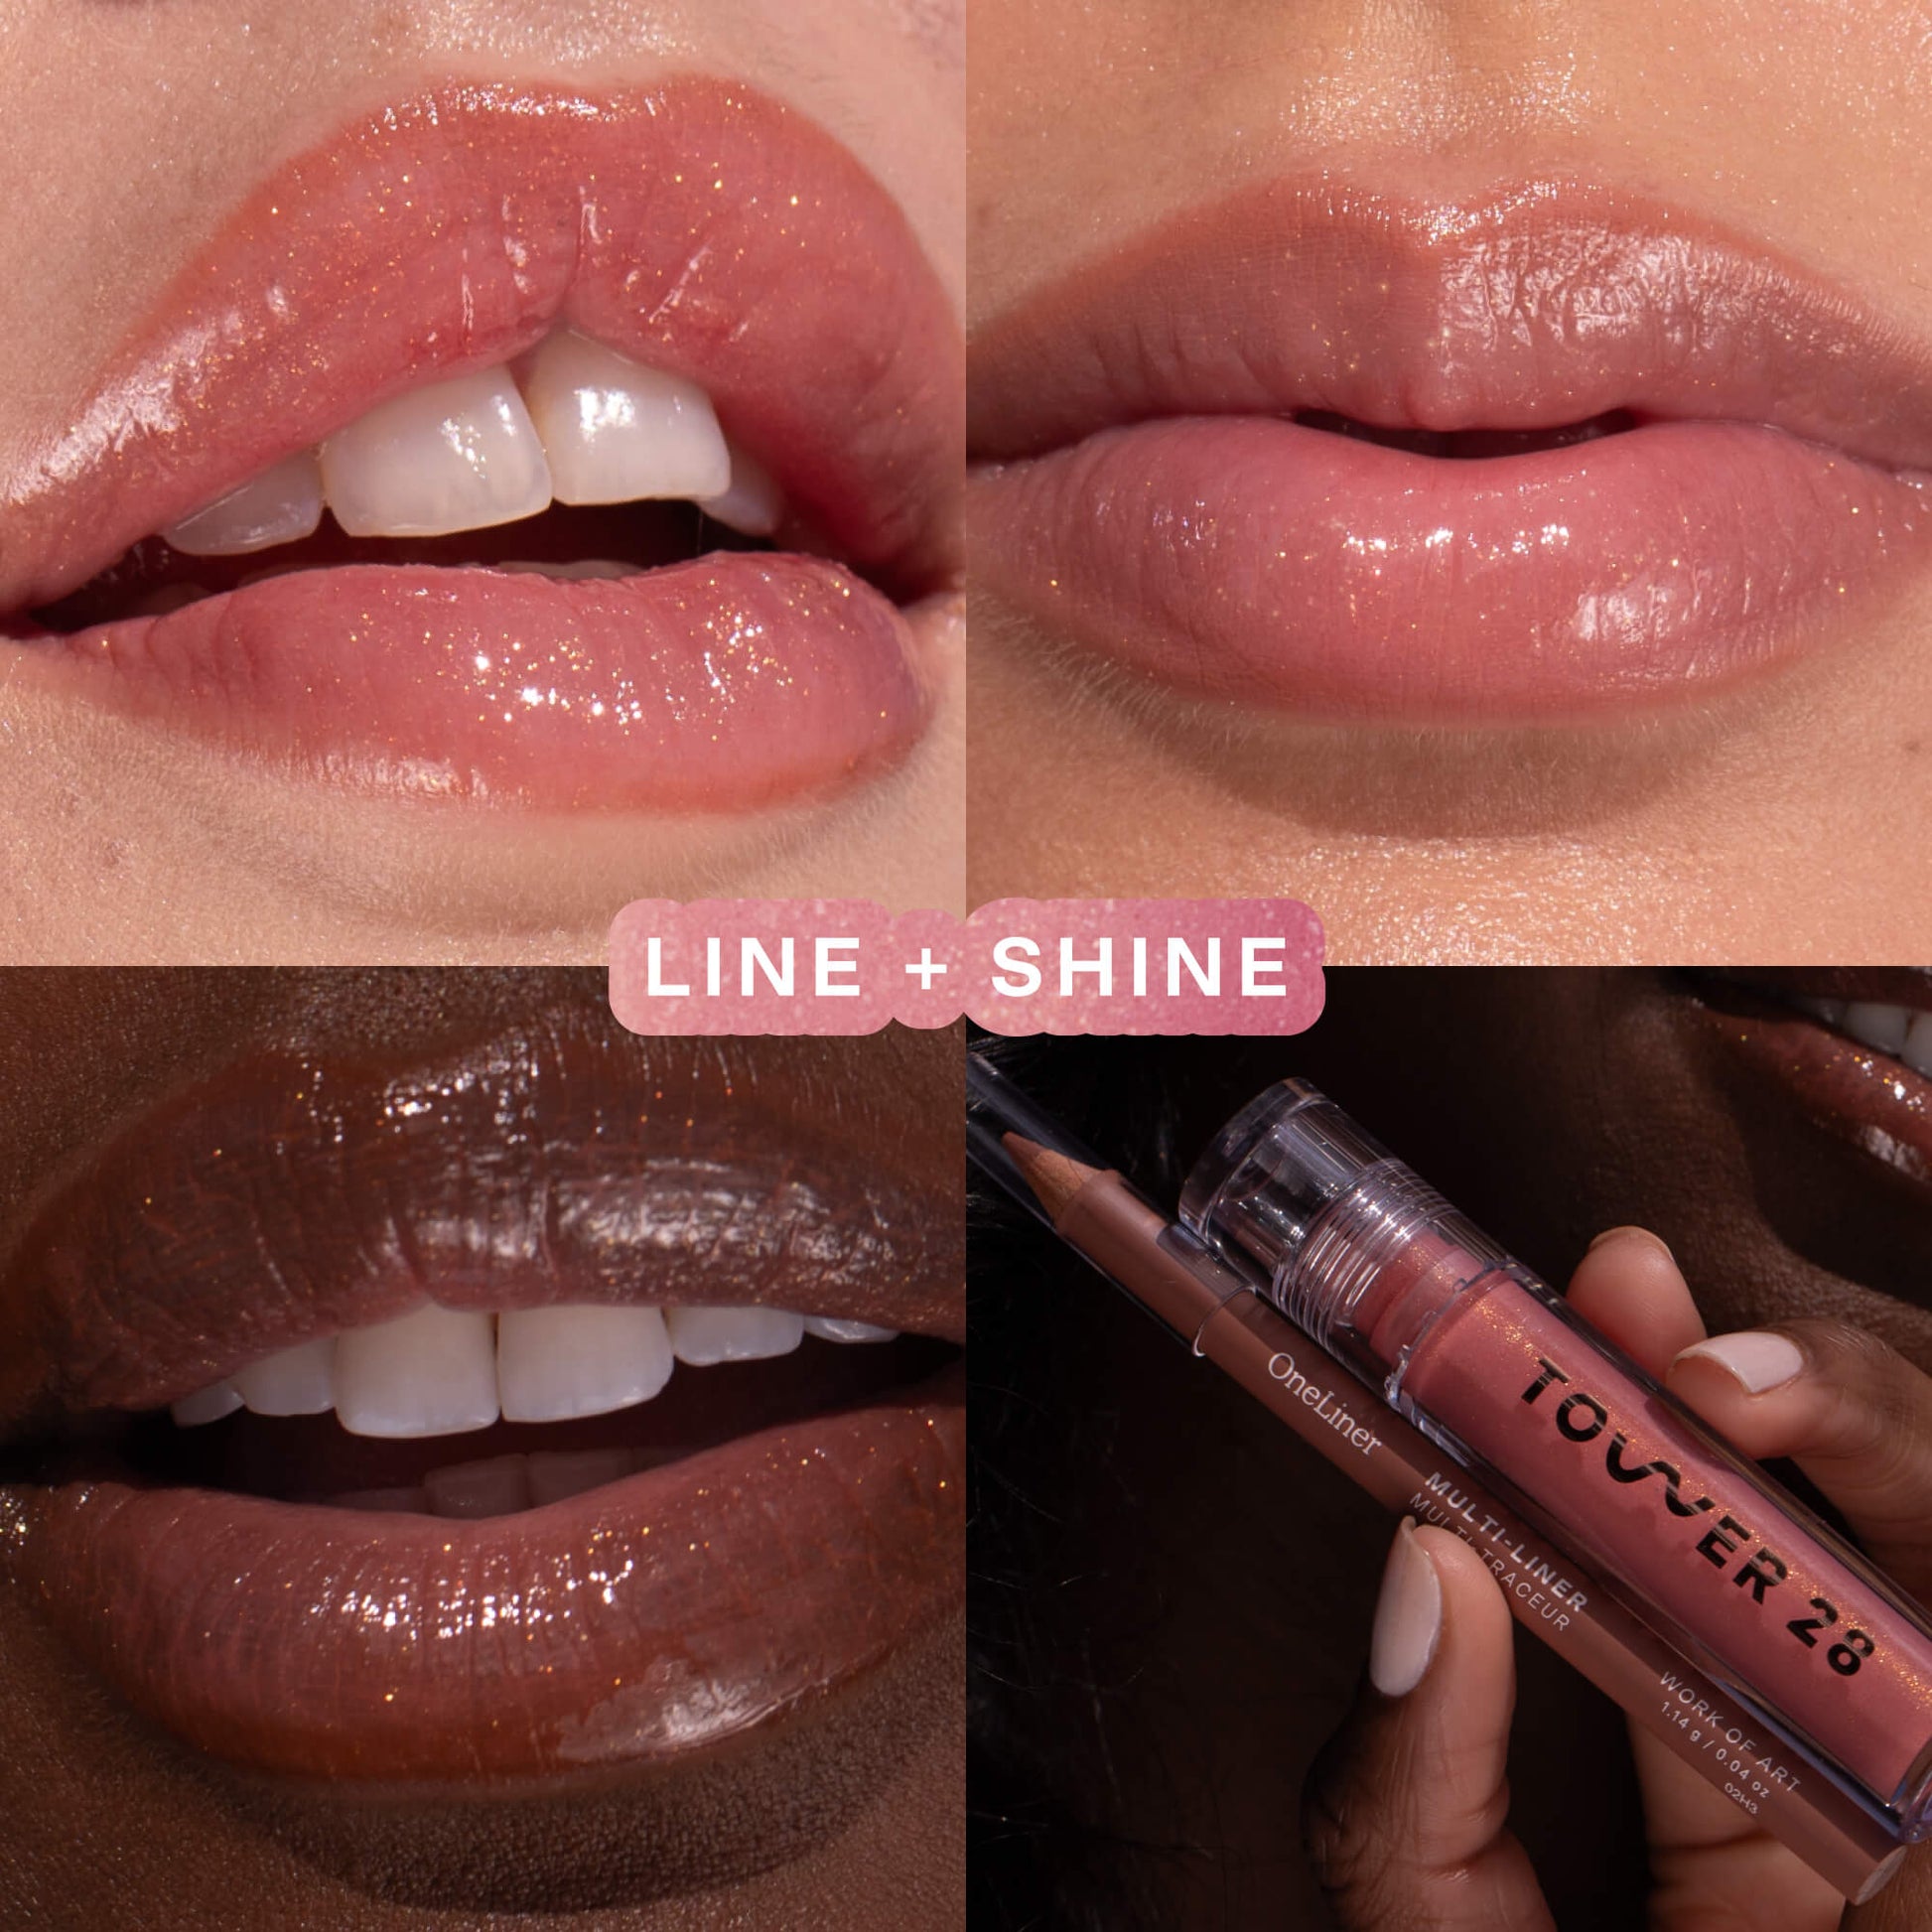 [Shared: Two models with different skin tones wearing the Tower 28 Beauty Line + Shine Lip Kit  on their lips.